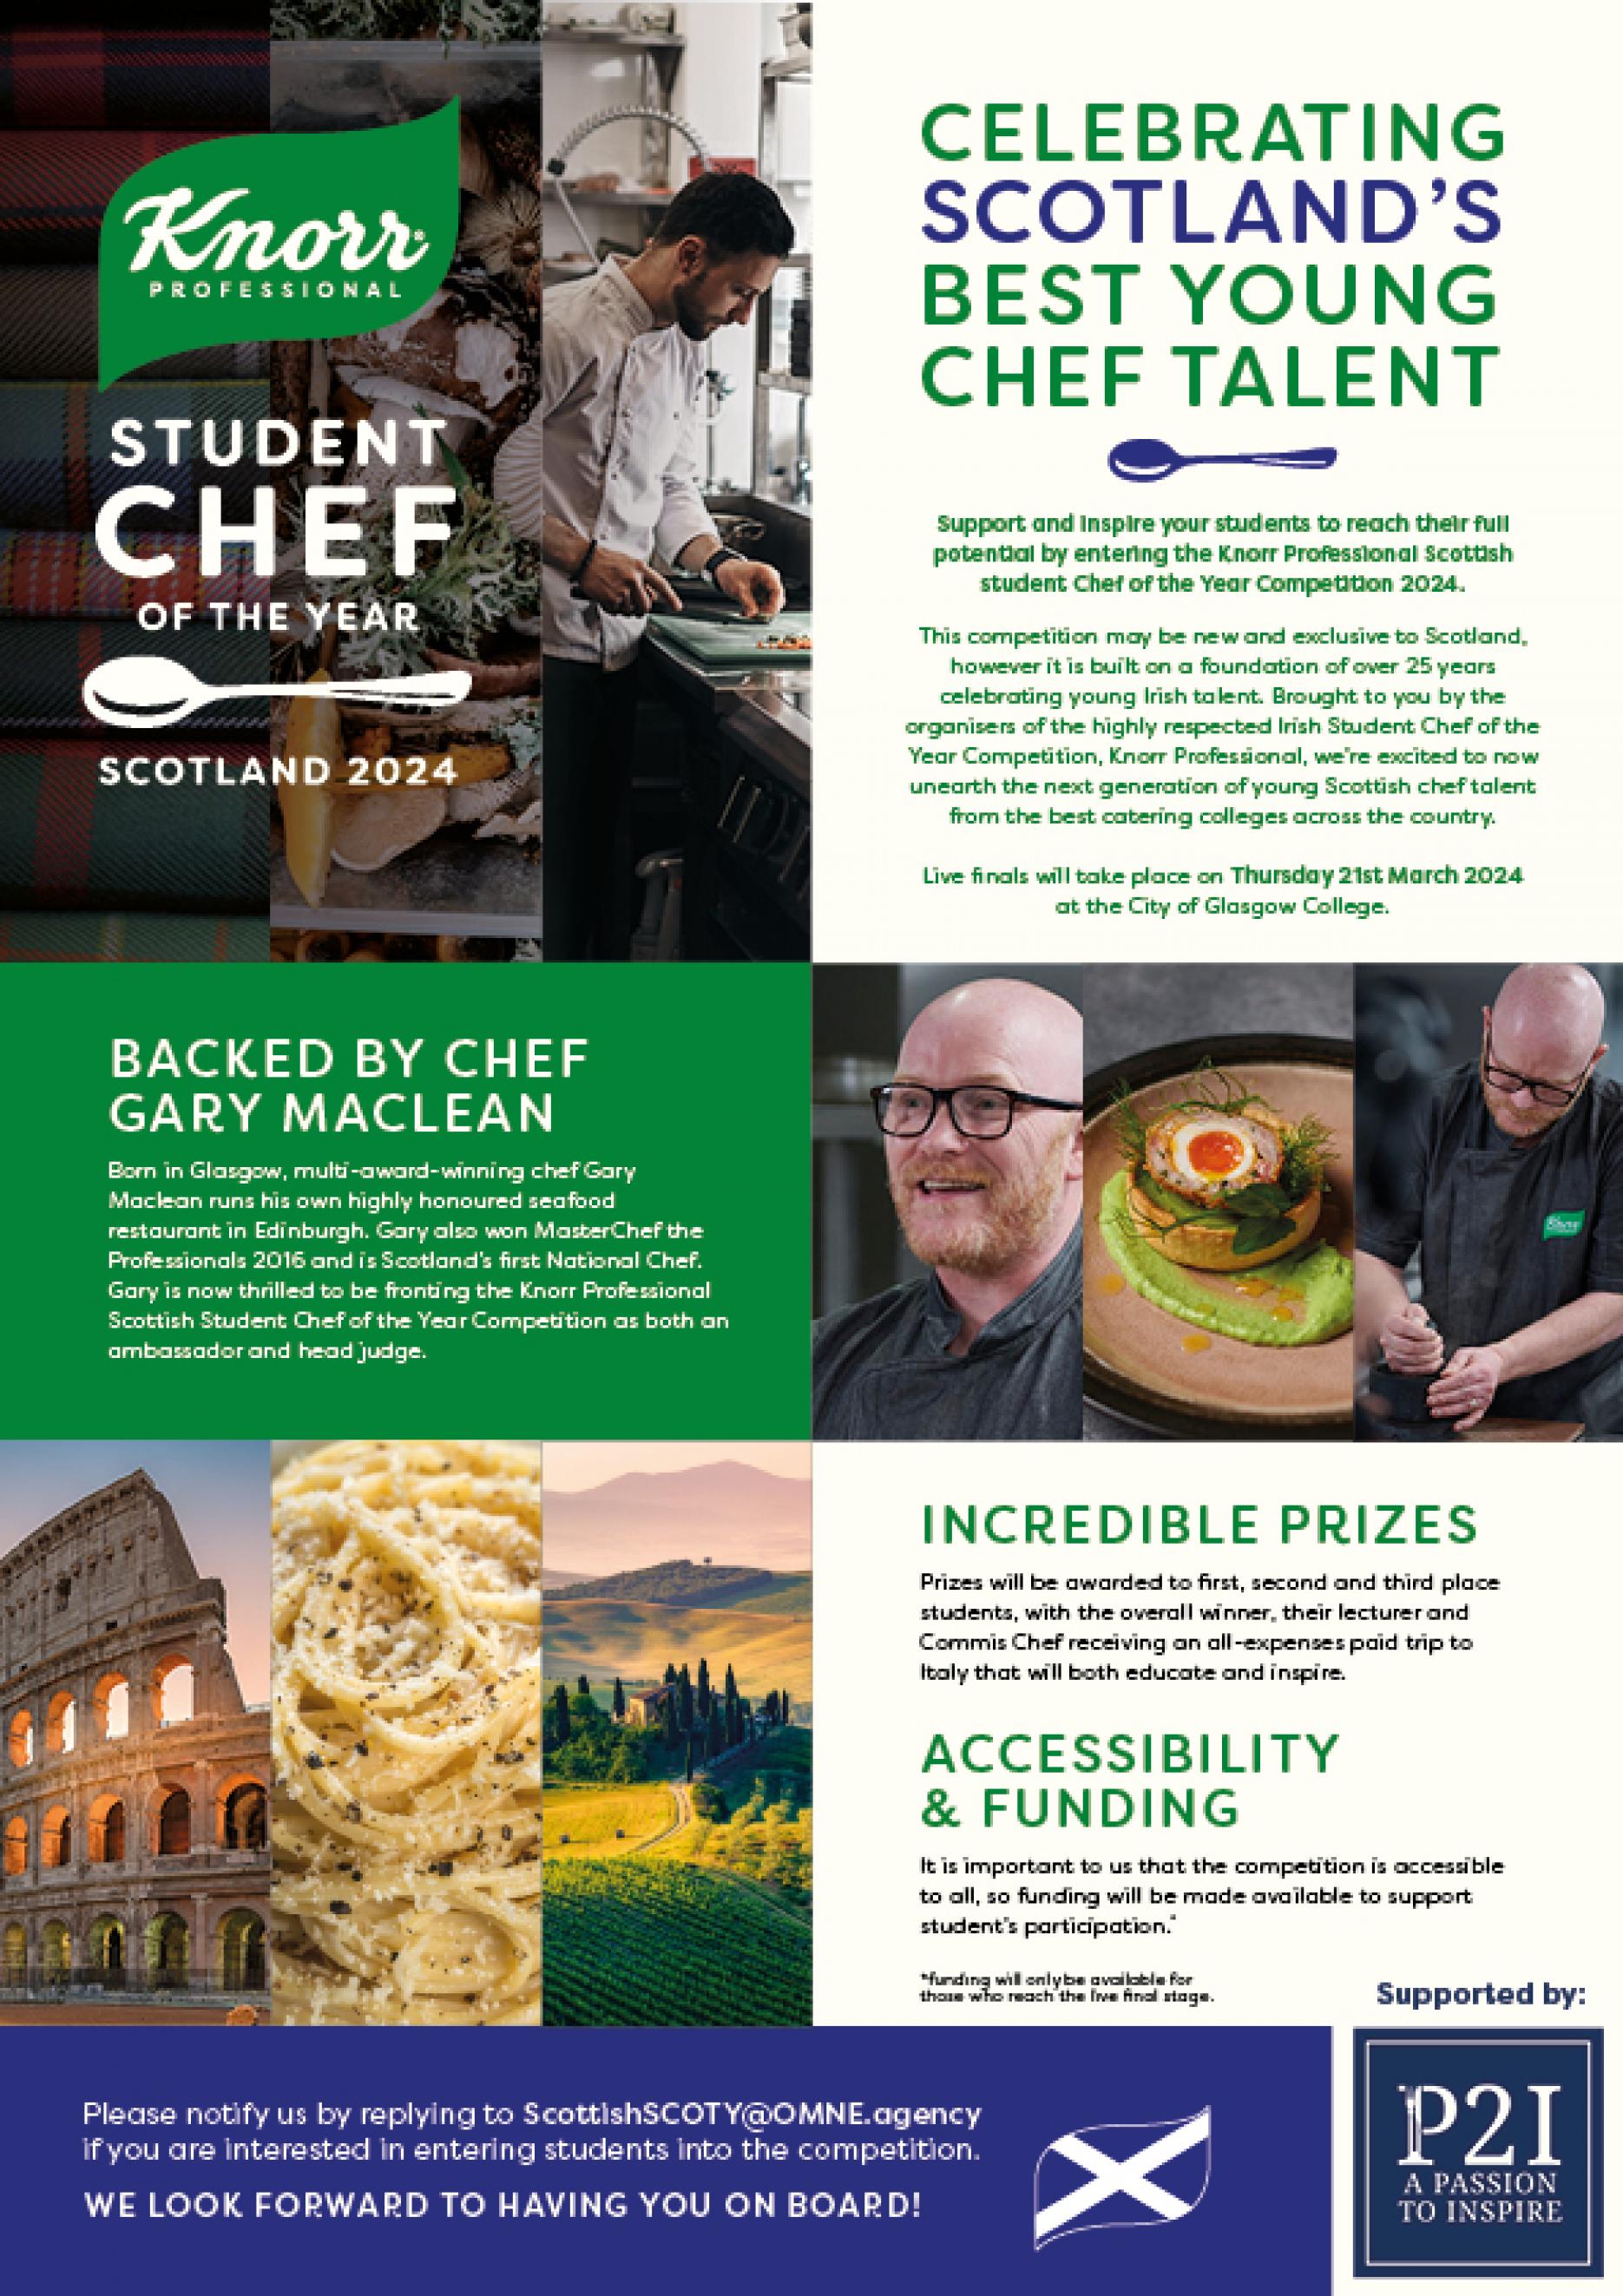 Knorr Professional launches Scottish student chef competition